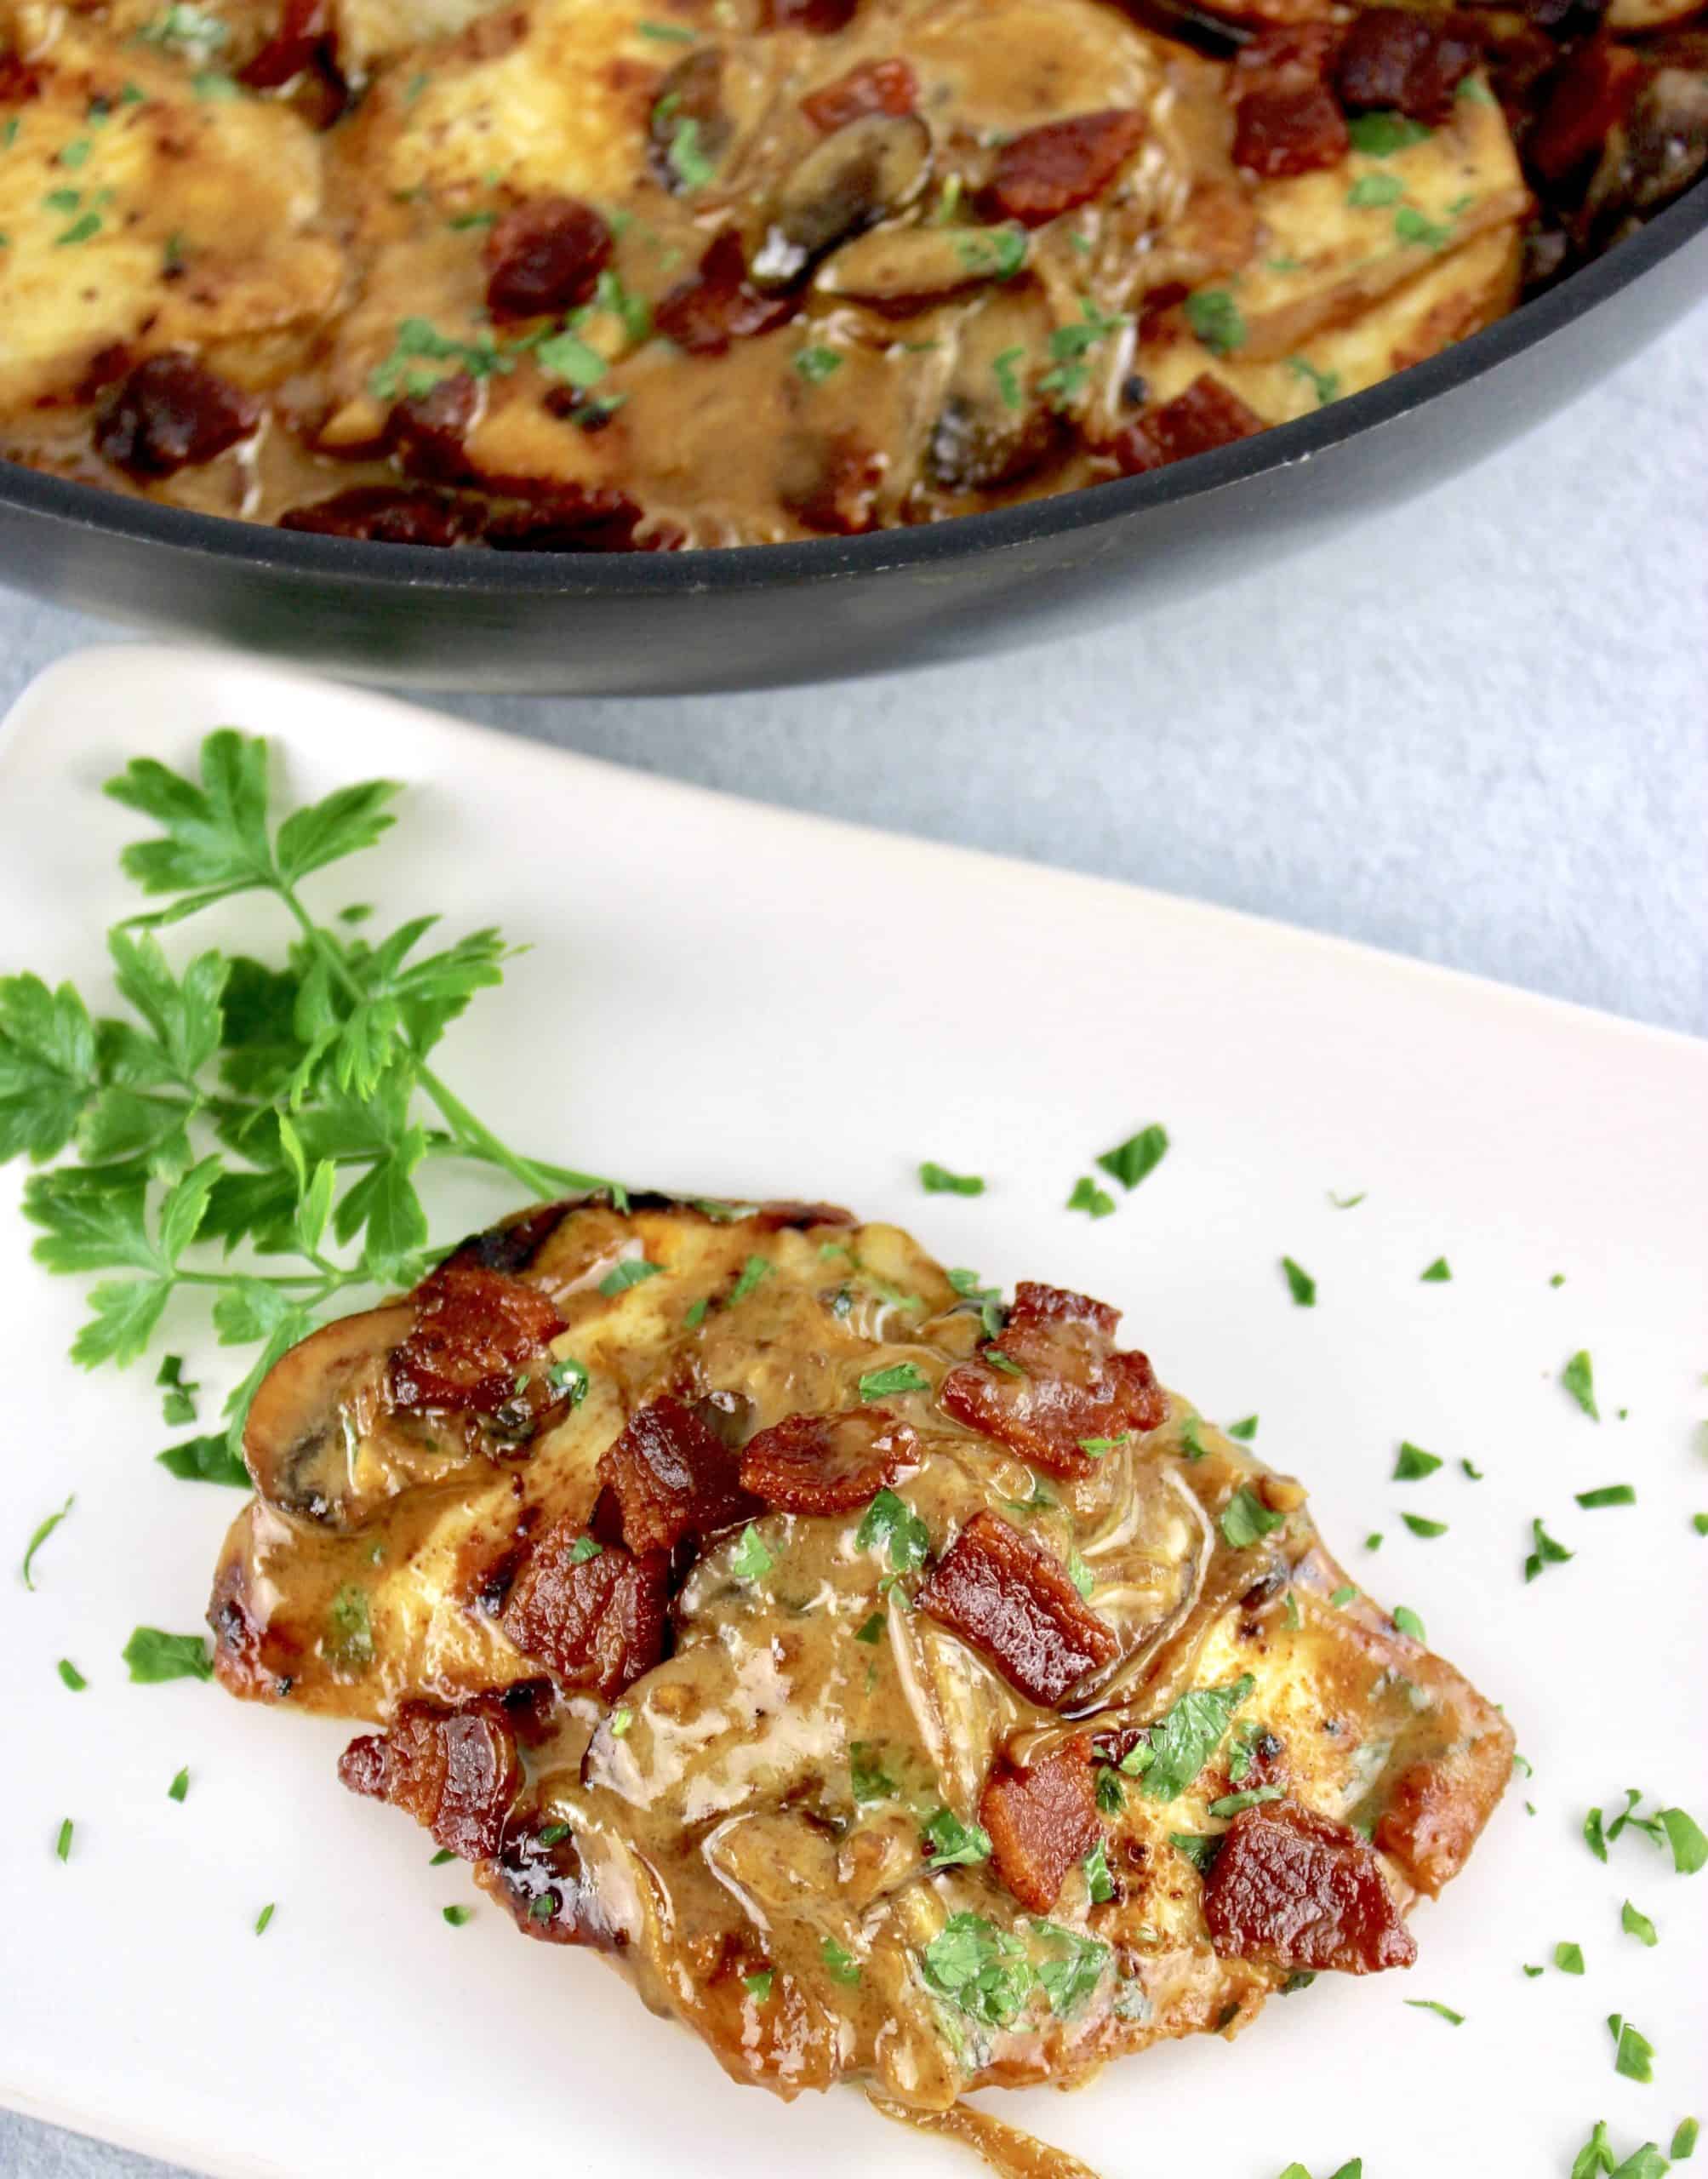 Creamy Bacon Mushroom Chicken piece on white plate with parsley garnish and skillet in background